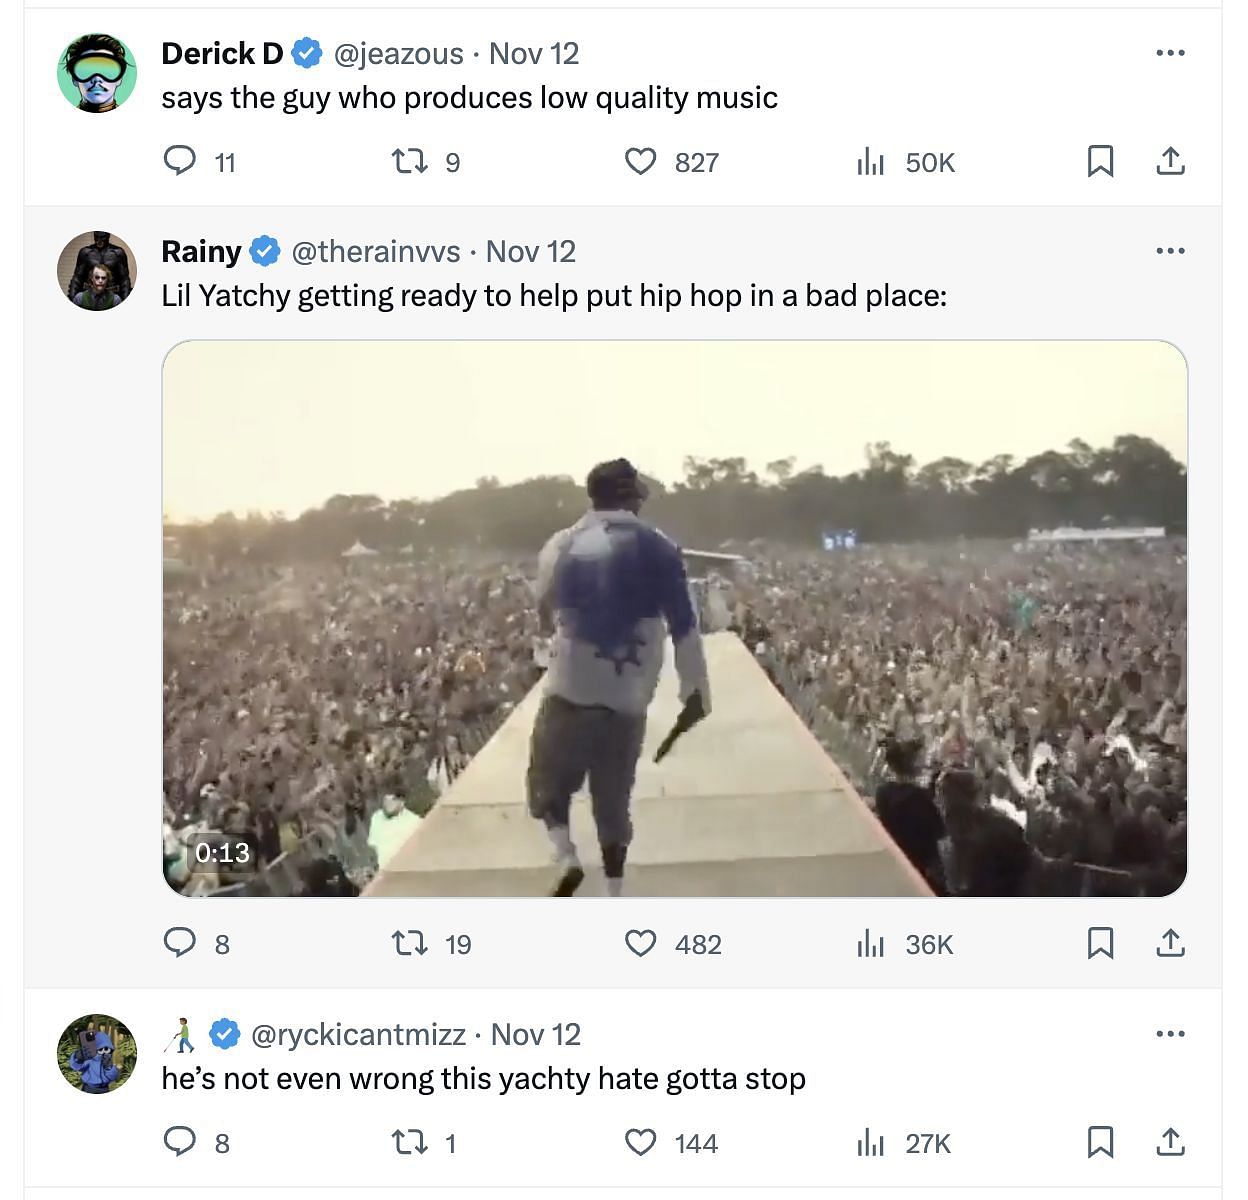 Social media users react to the rapper commenting on the rap scene in the country: Details and reactions explored. (Image via Twitter)